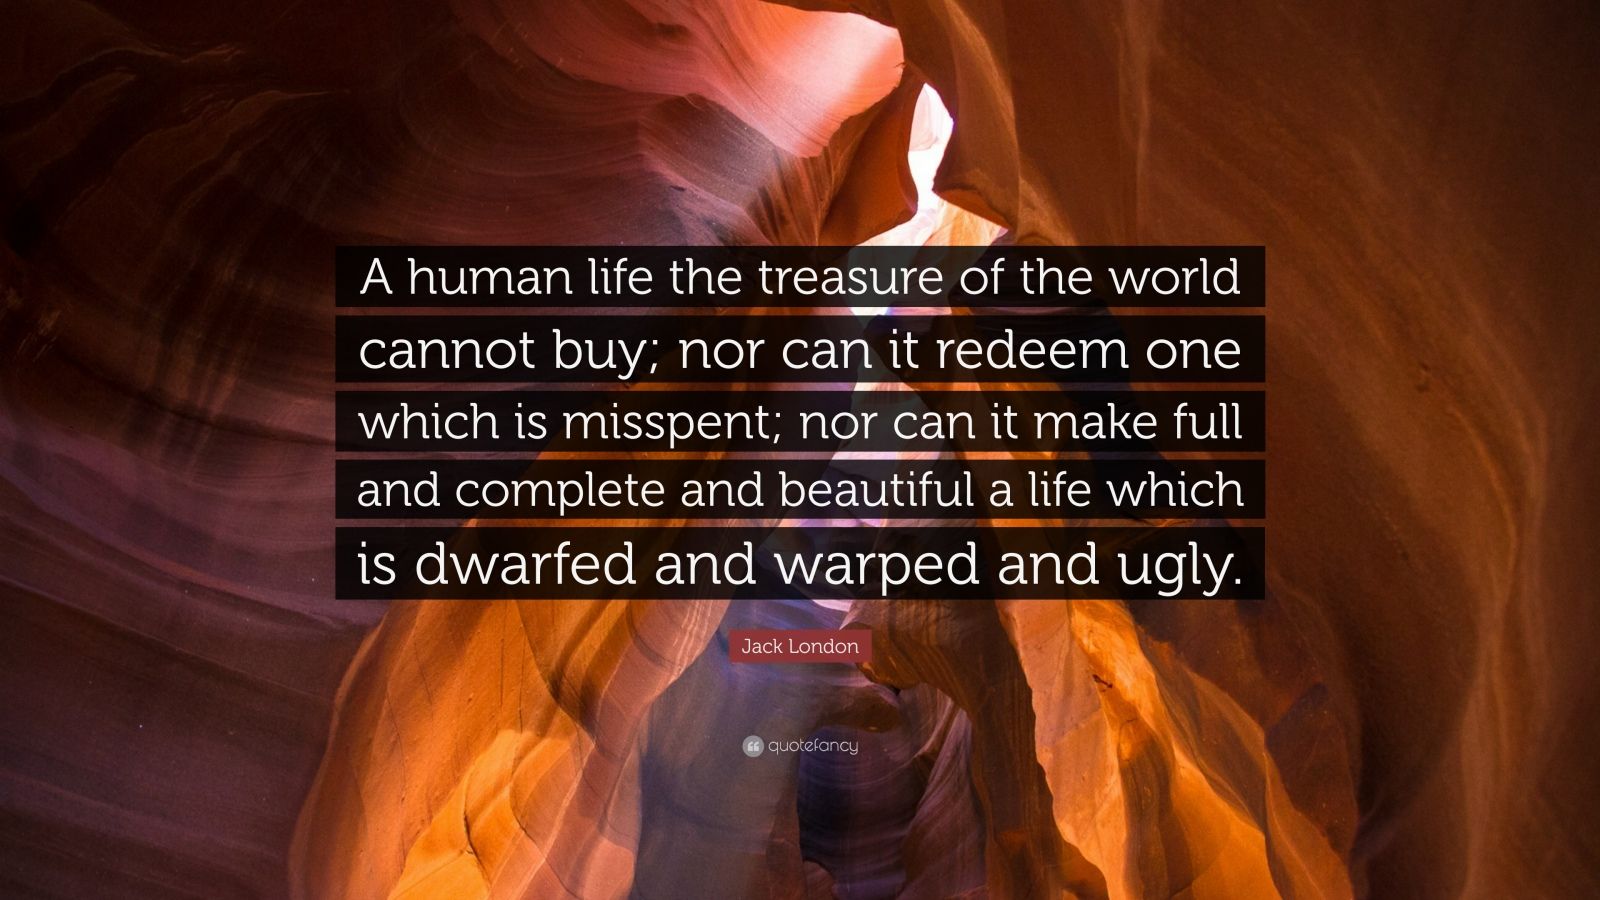 Jack London Quote “A human life the treasure of the world cannot